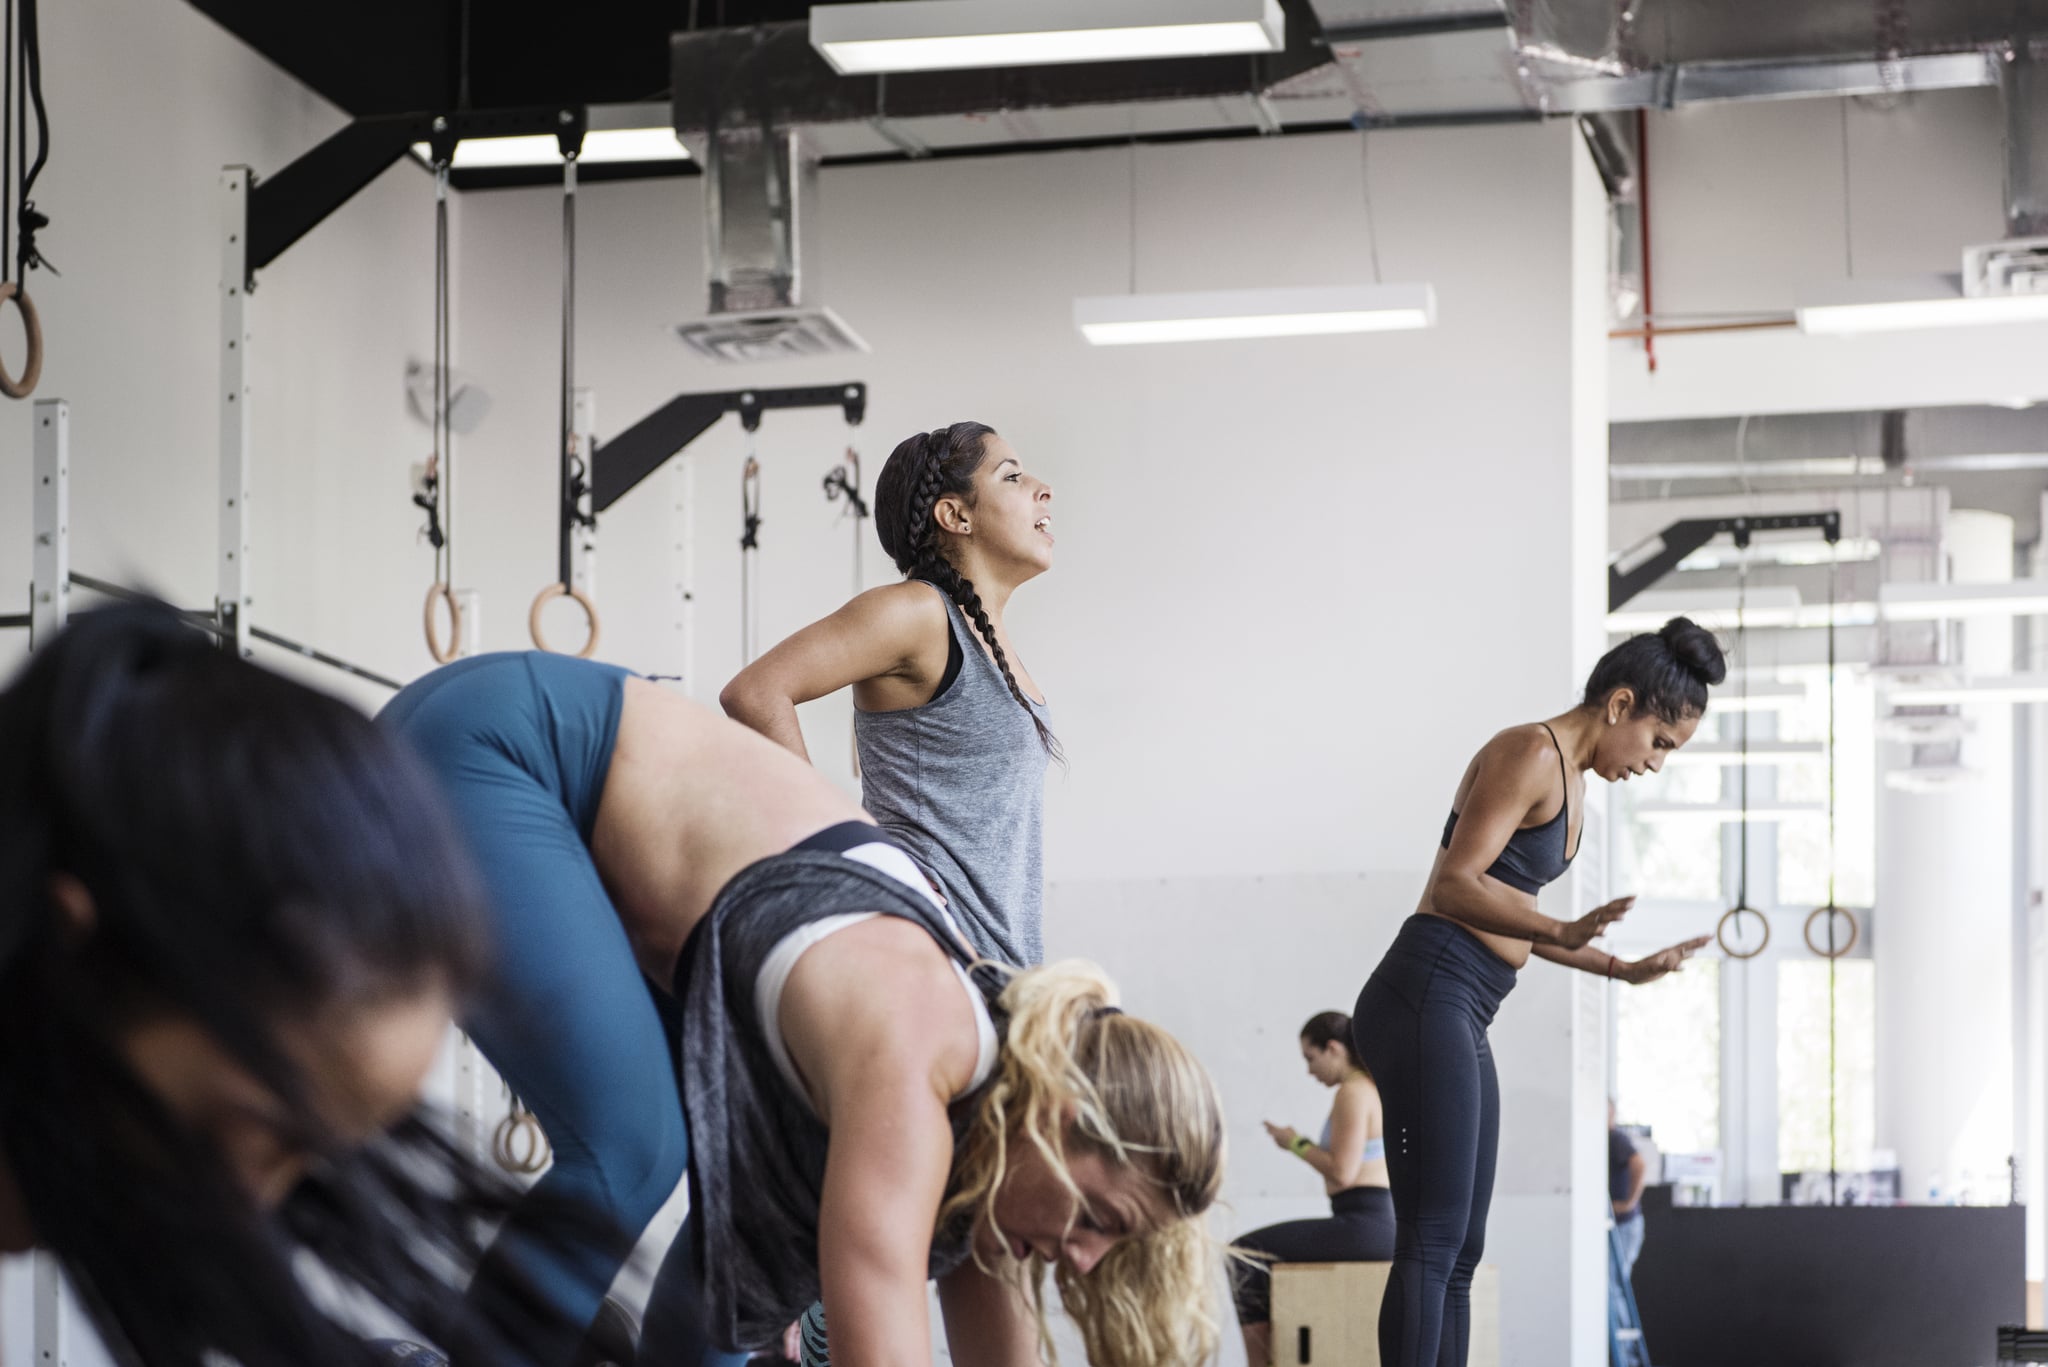 <p>EMOM stands for "every minute on the minute," and it's a signature style of CrossFit workout. To do it, you set a timer, and every minute (on the one-minute, two-minute, three-minute mark, etc.) you do a specific exercise. This <a href="https://www.popsugar.com/fitness/30-minute-crossfit-emom-workout-46493561" class="ga-track">30-minute EMOM CrossFit workout</a> combines strength and cardio moves and is sure to leave you breathless.</p> <p><strong>Equipment needed:</strong> A jump rope and pair of medium-weight dumbbells (six to 25 pounds).</p>